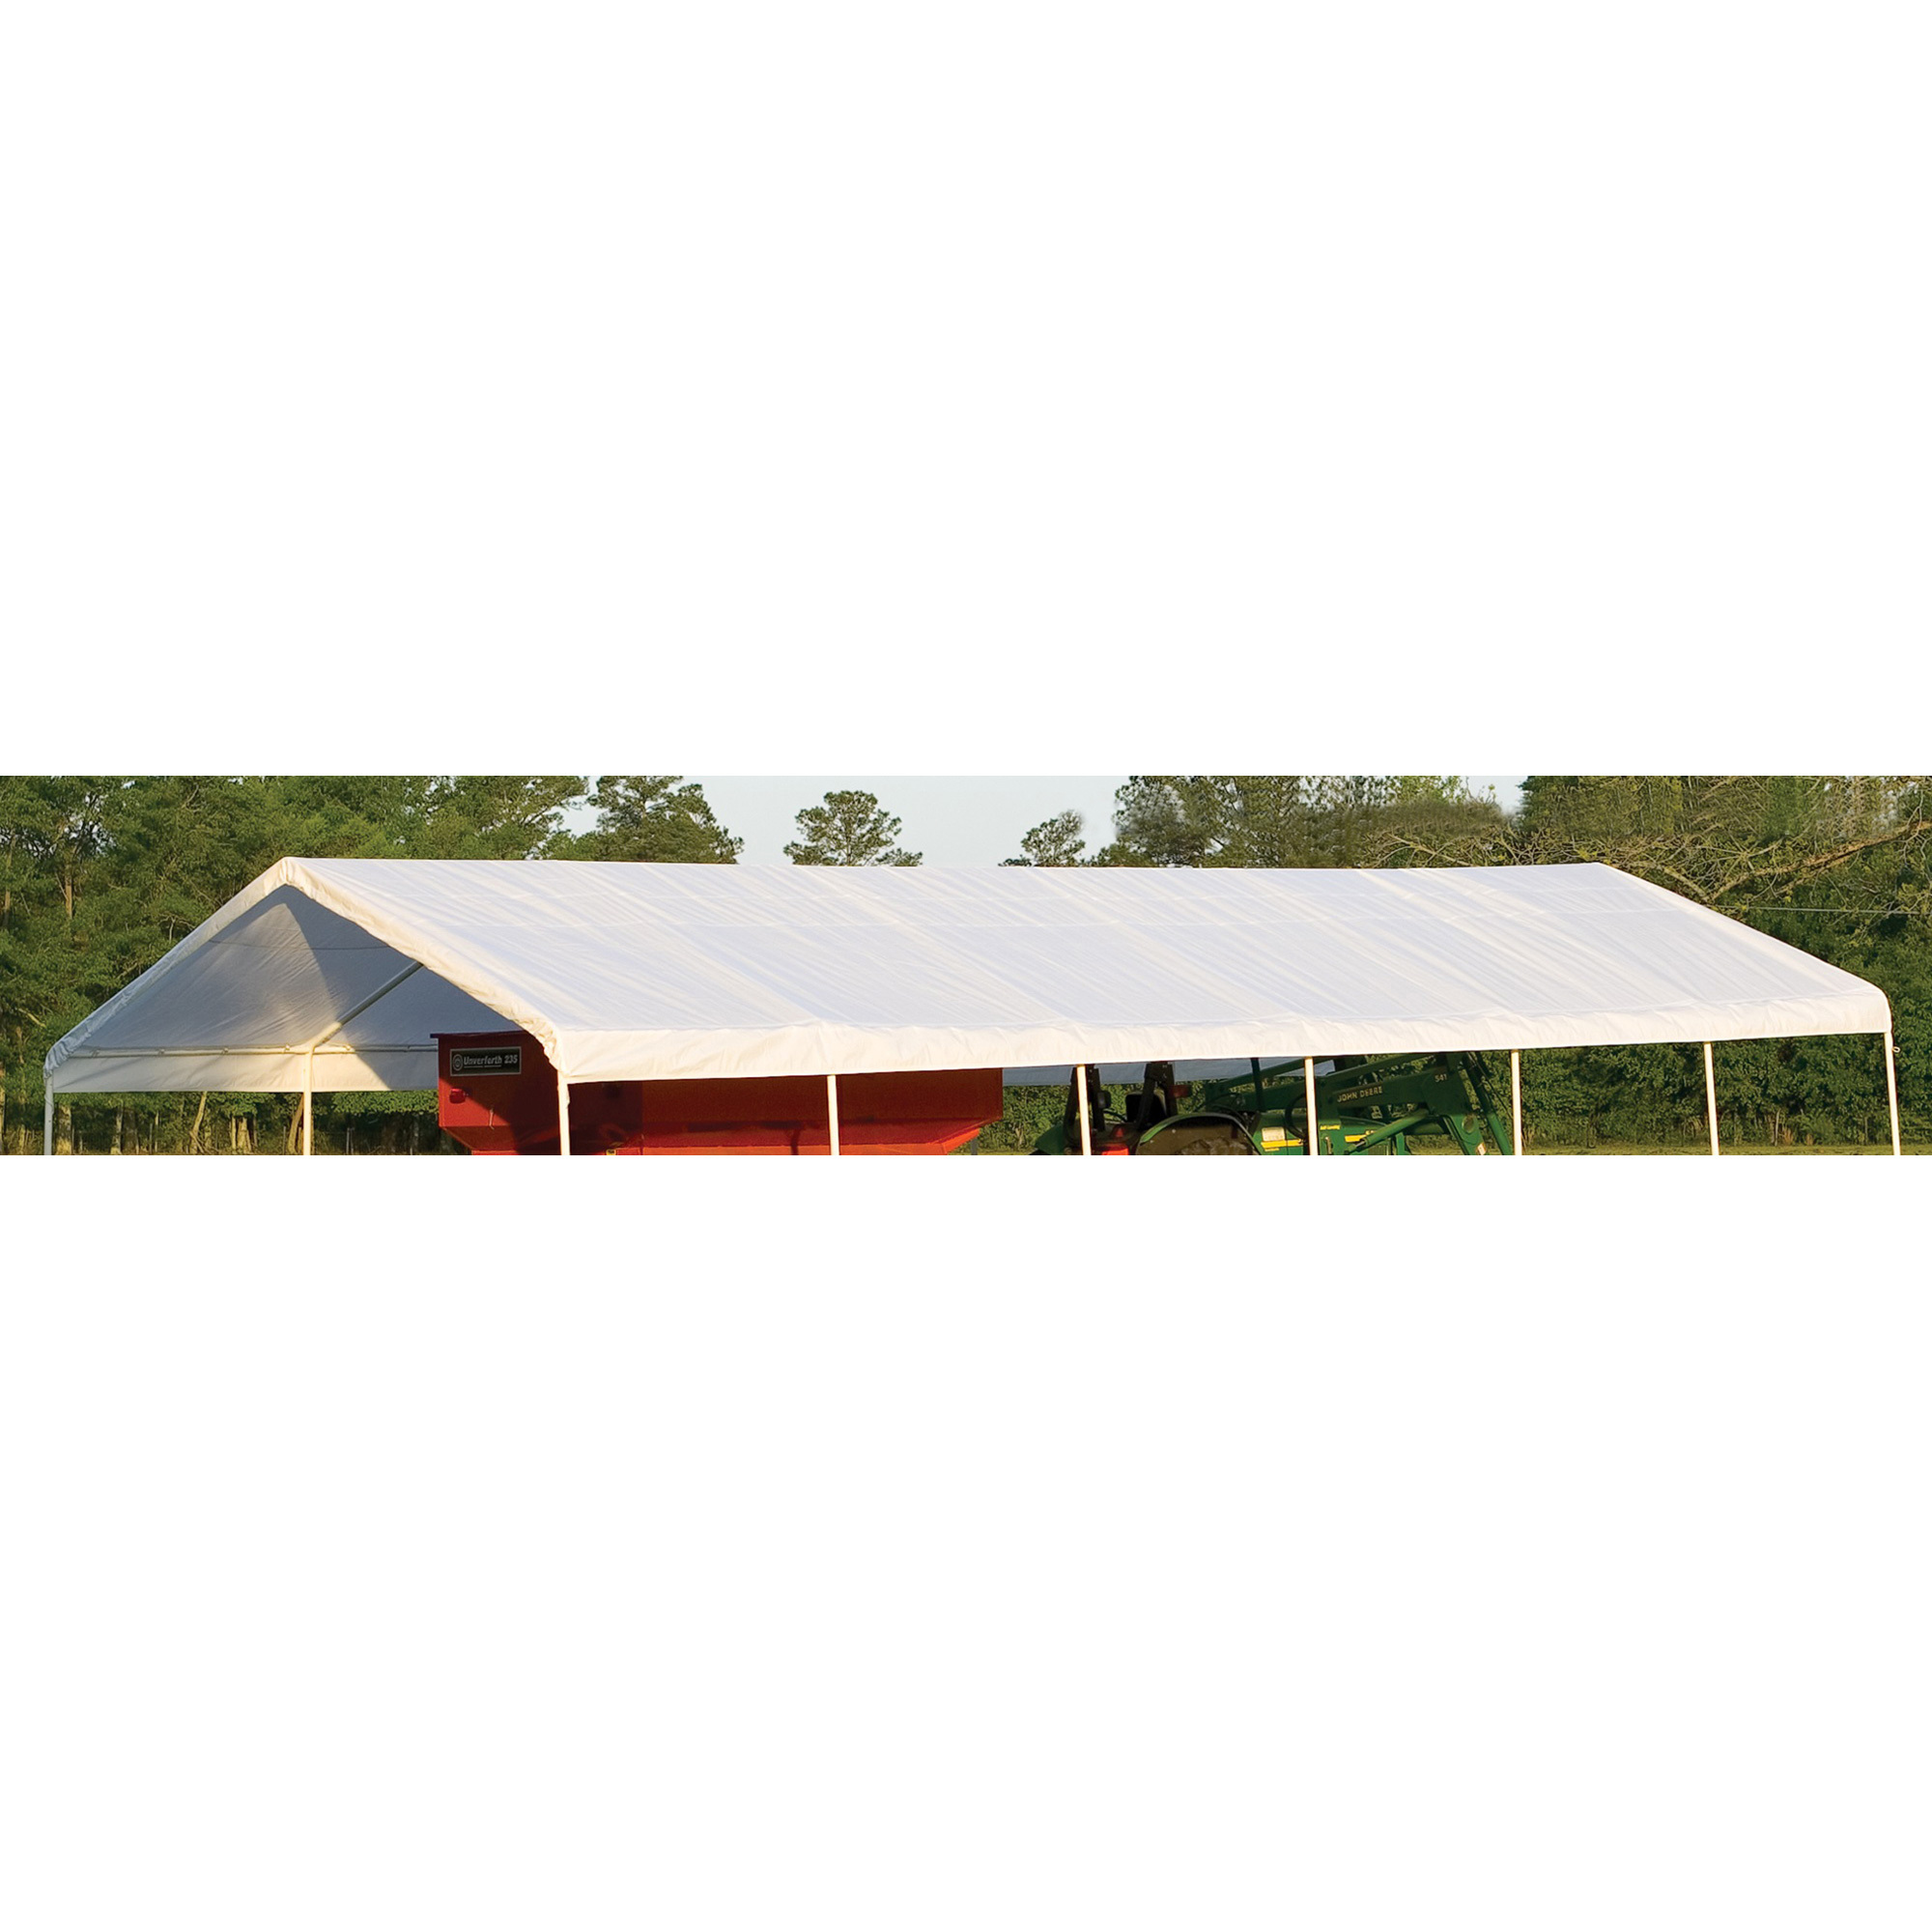 ShelterLogic Replacement Canopy Top, For Super Max 18ft. x 40ft. Canopy, White, Model 20179